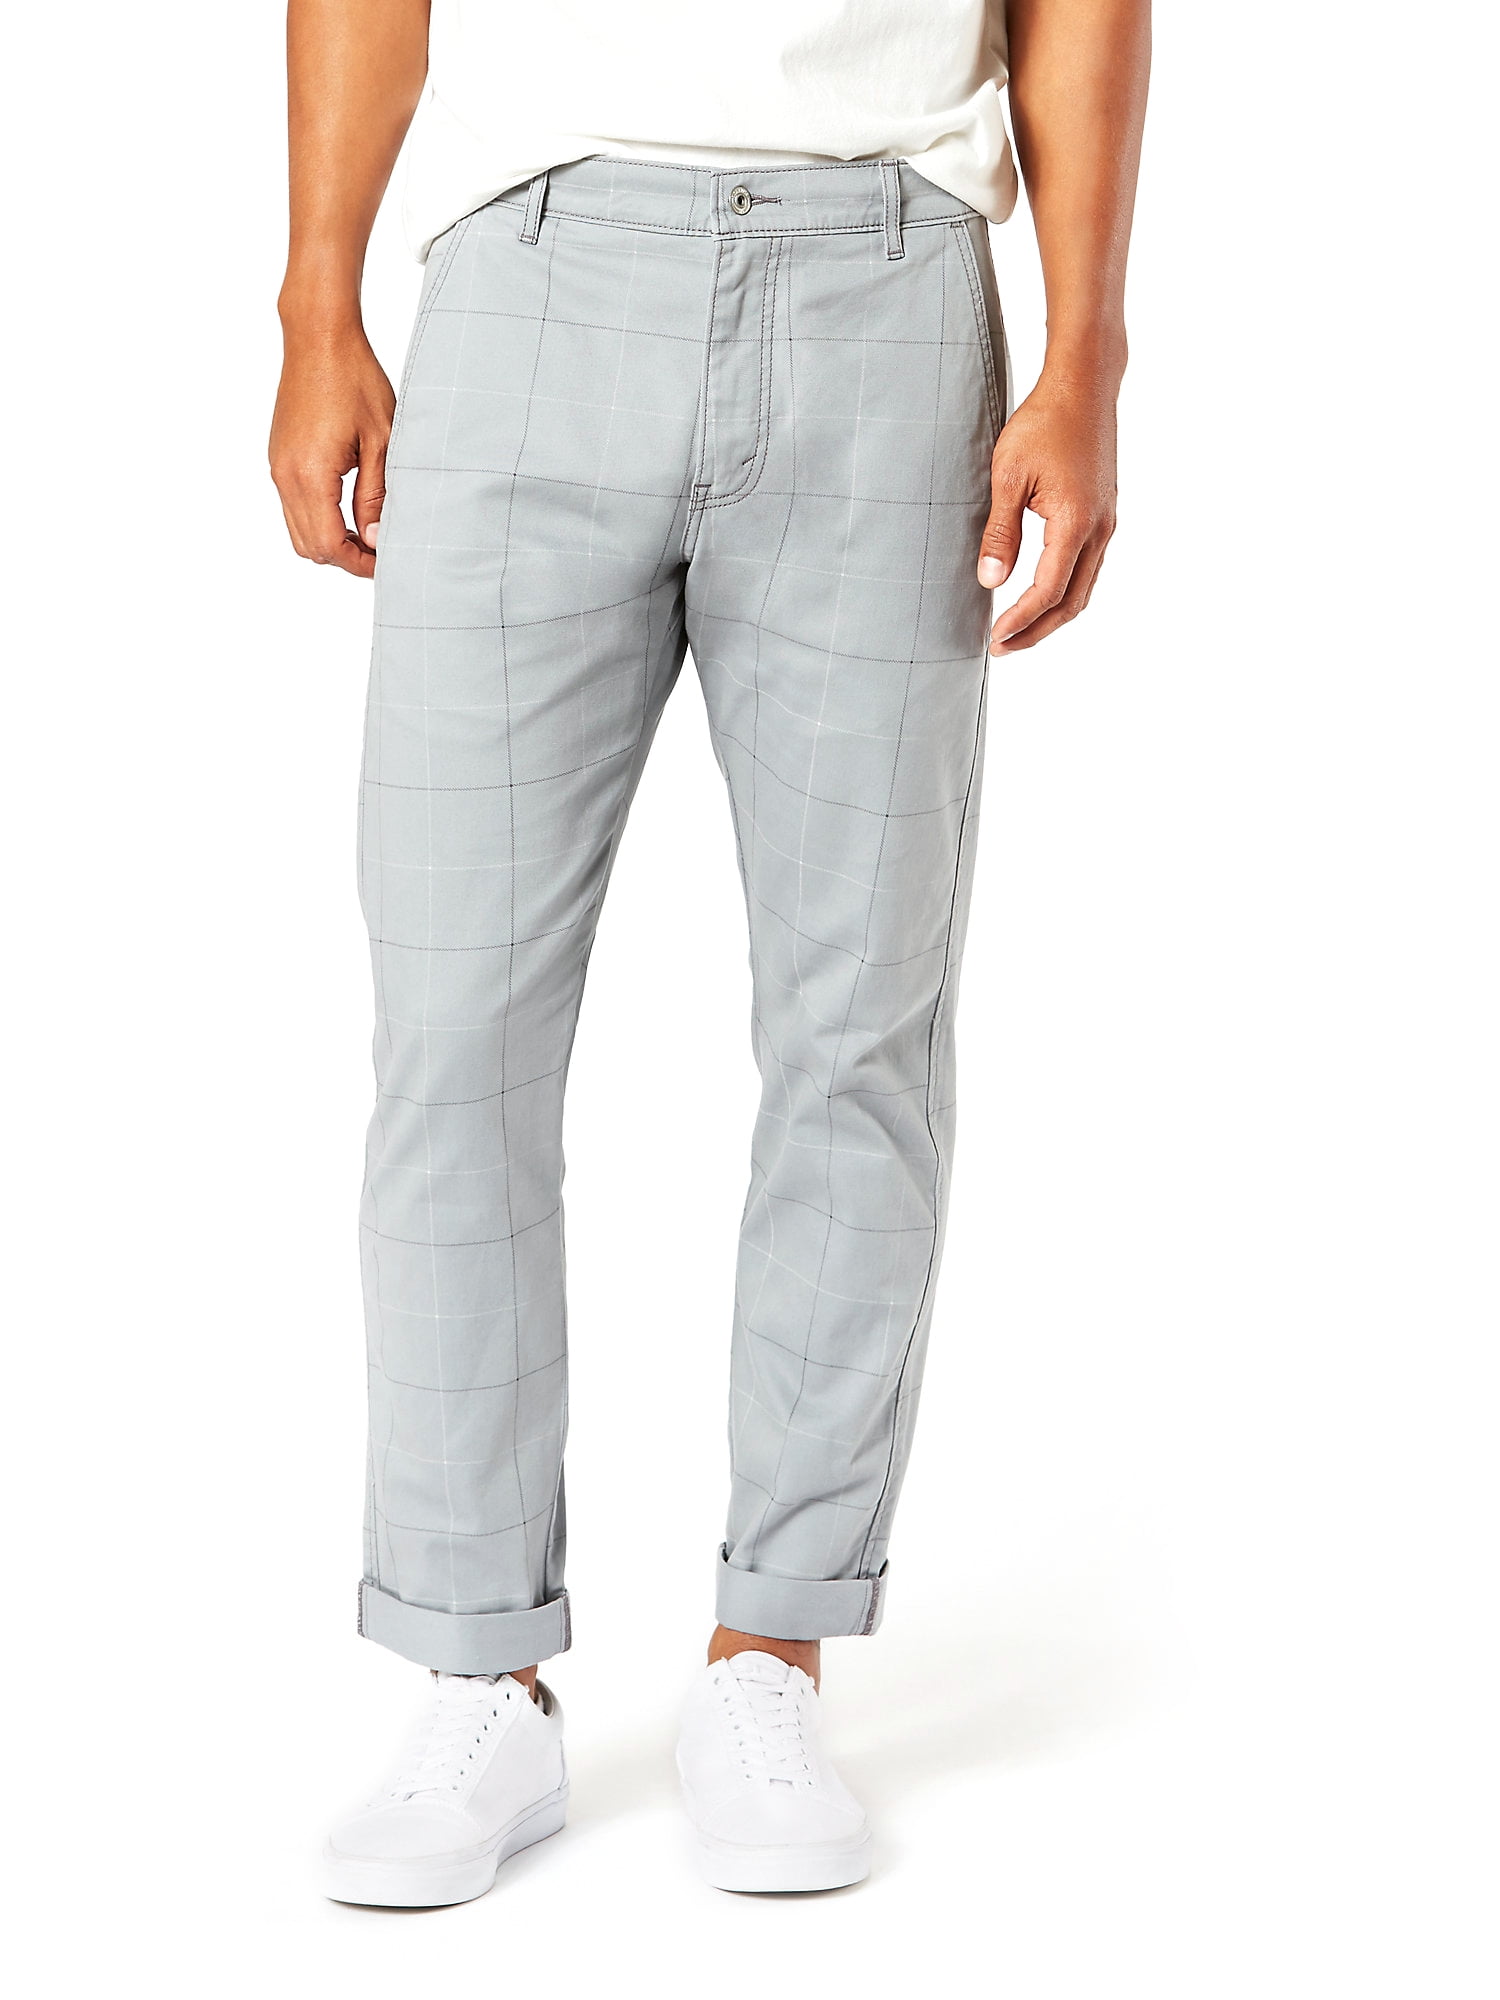 Signature by Levi Strauss & Co. Men's Chino Pants with Piping - Walmart.com